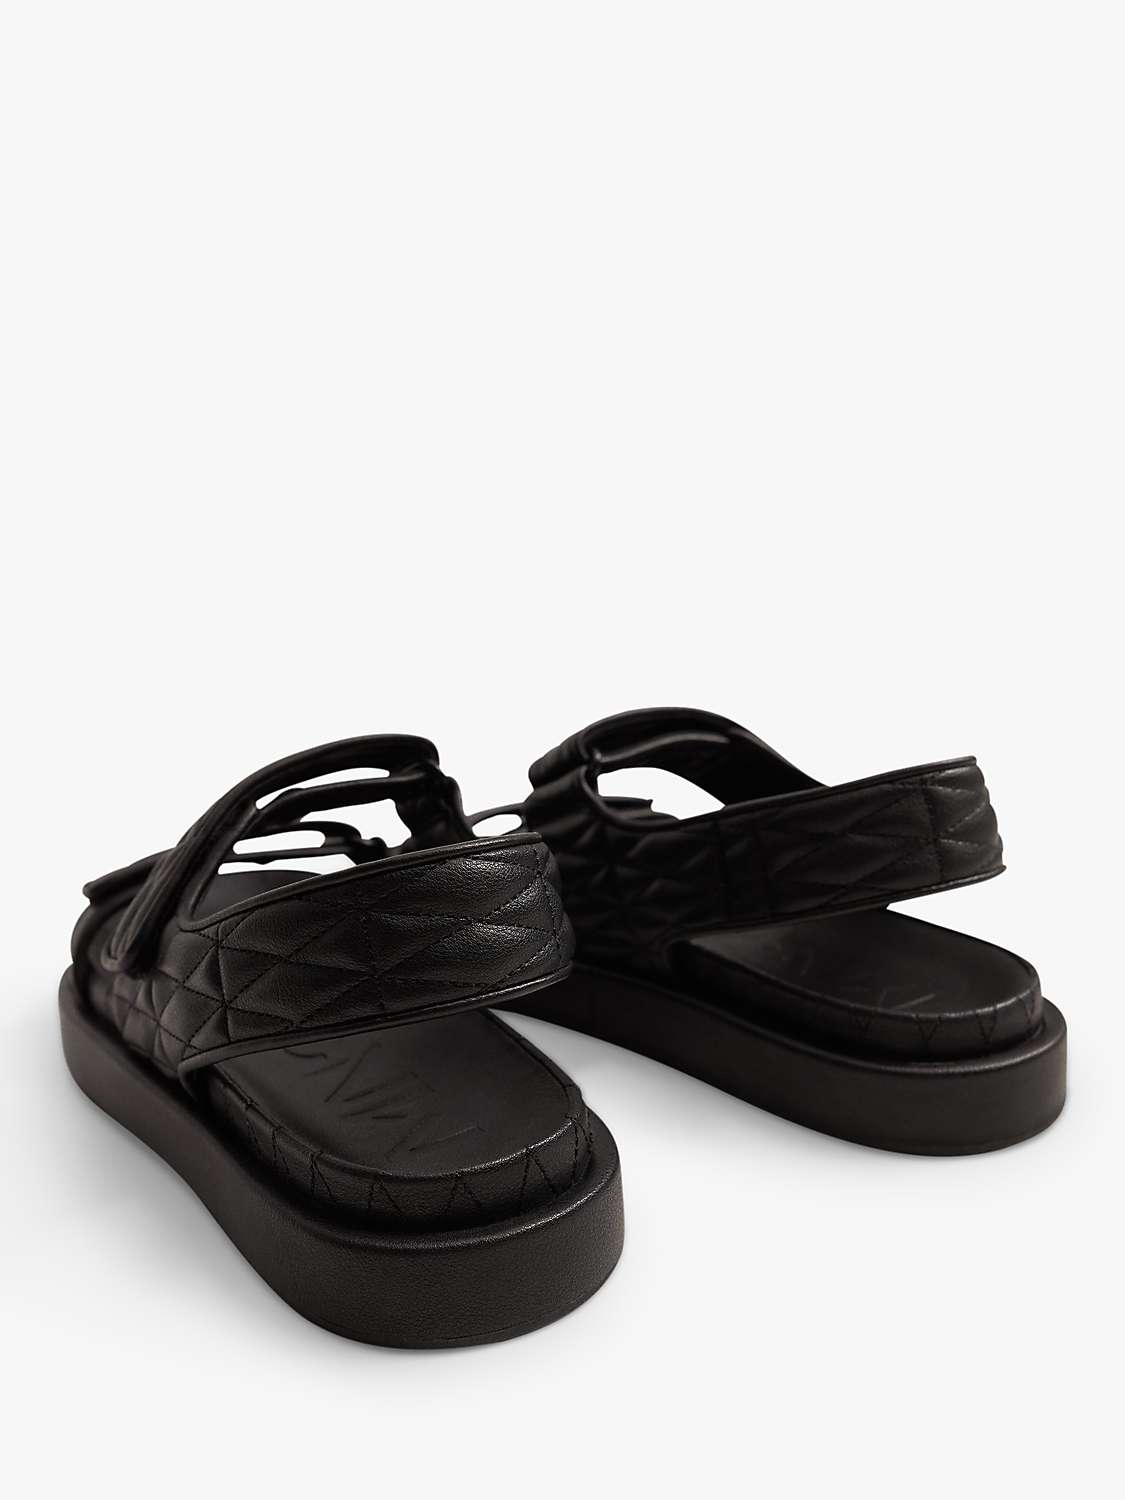 Mango Quilted Strap Sandals, Black at John Lewis & Partners